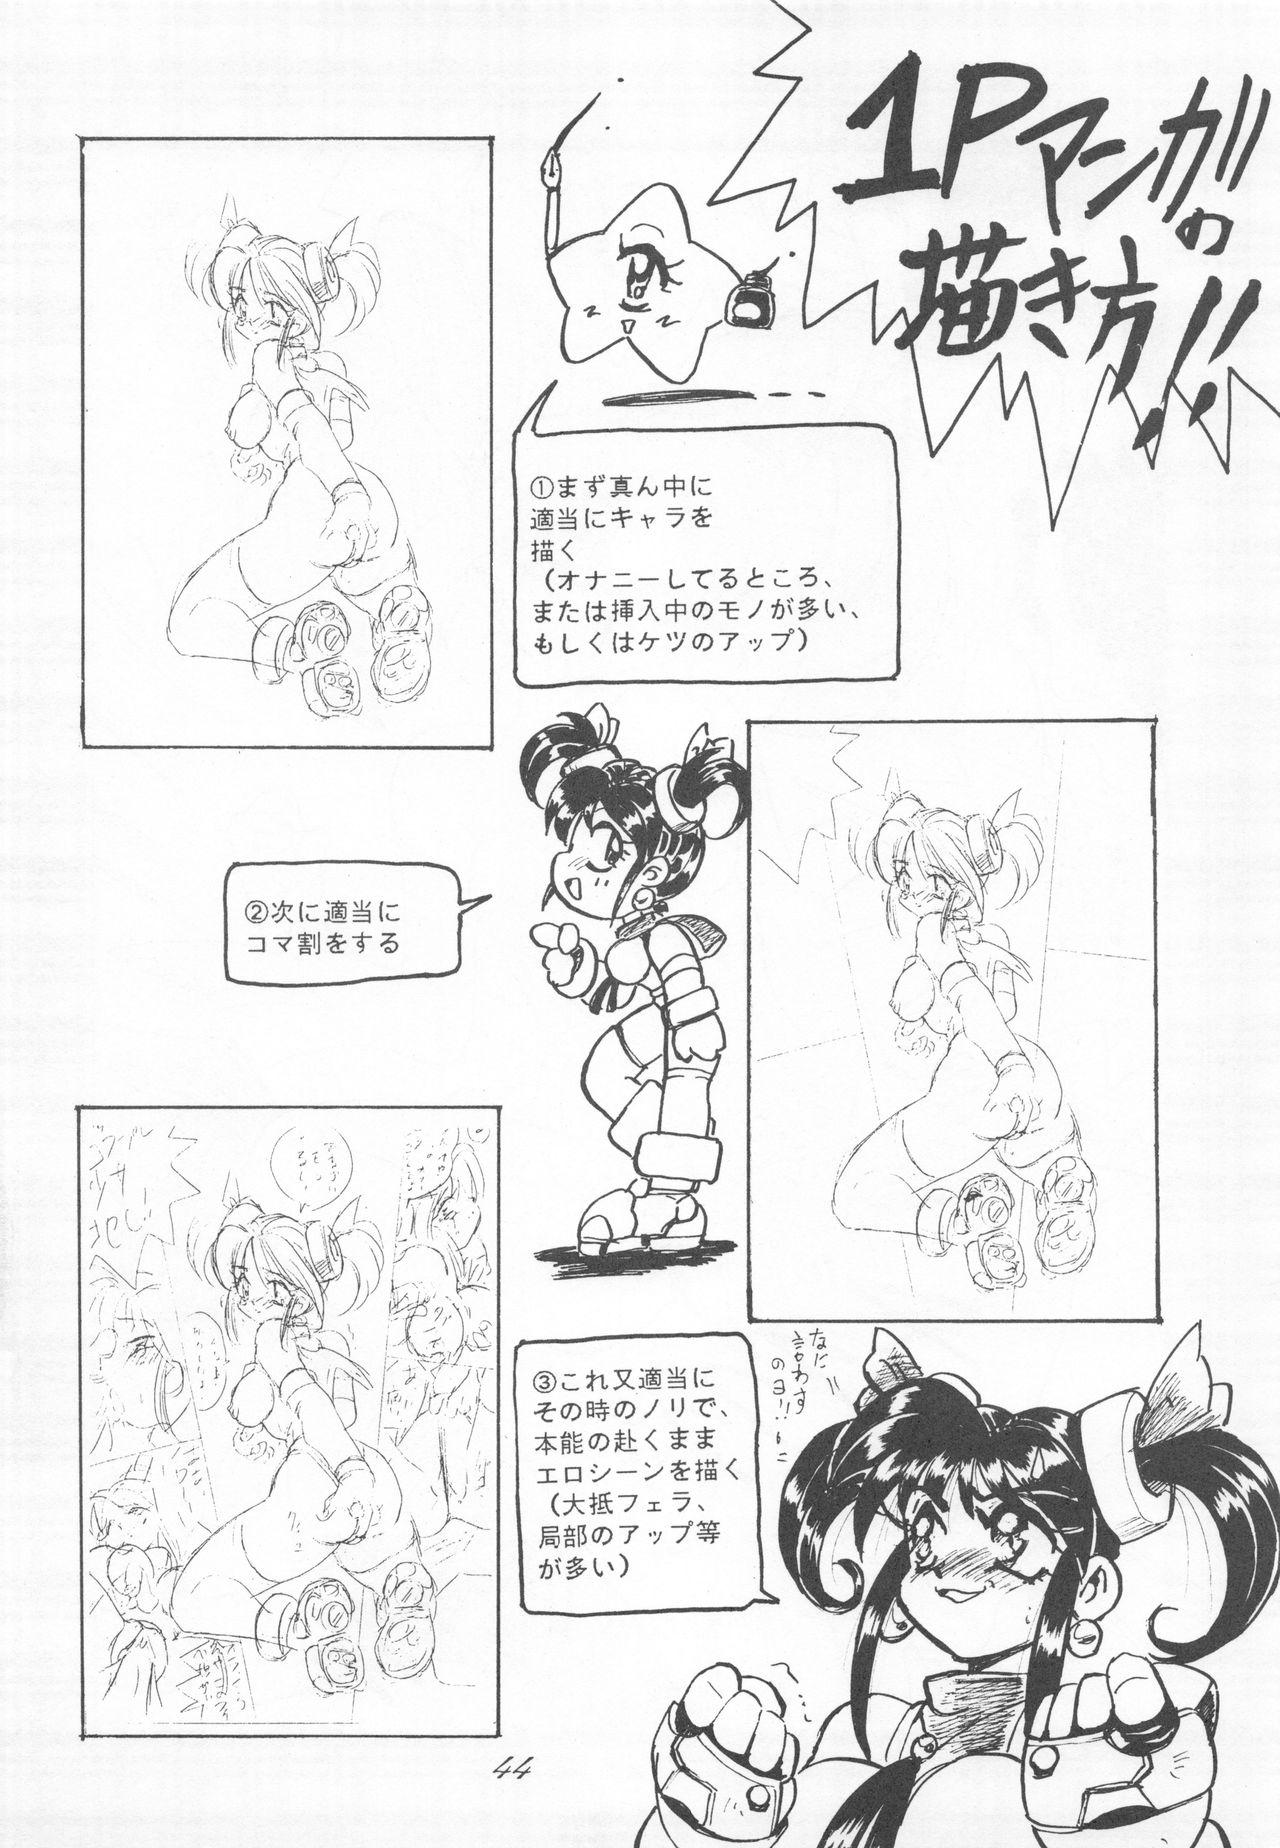 Sailor Moon 1 Page Gekijou P2 - SAILOR MOON ONE PAGE THEATER II 43